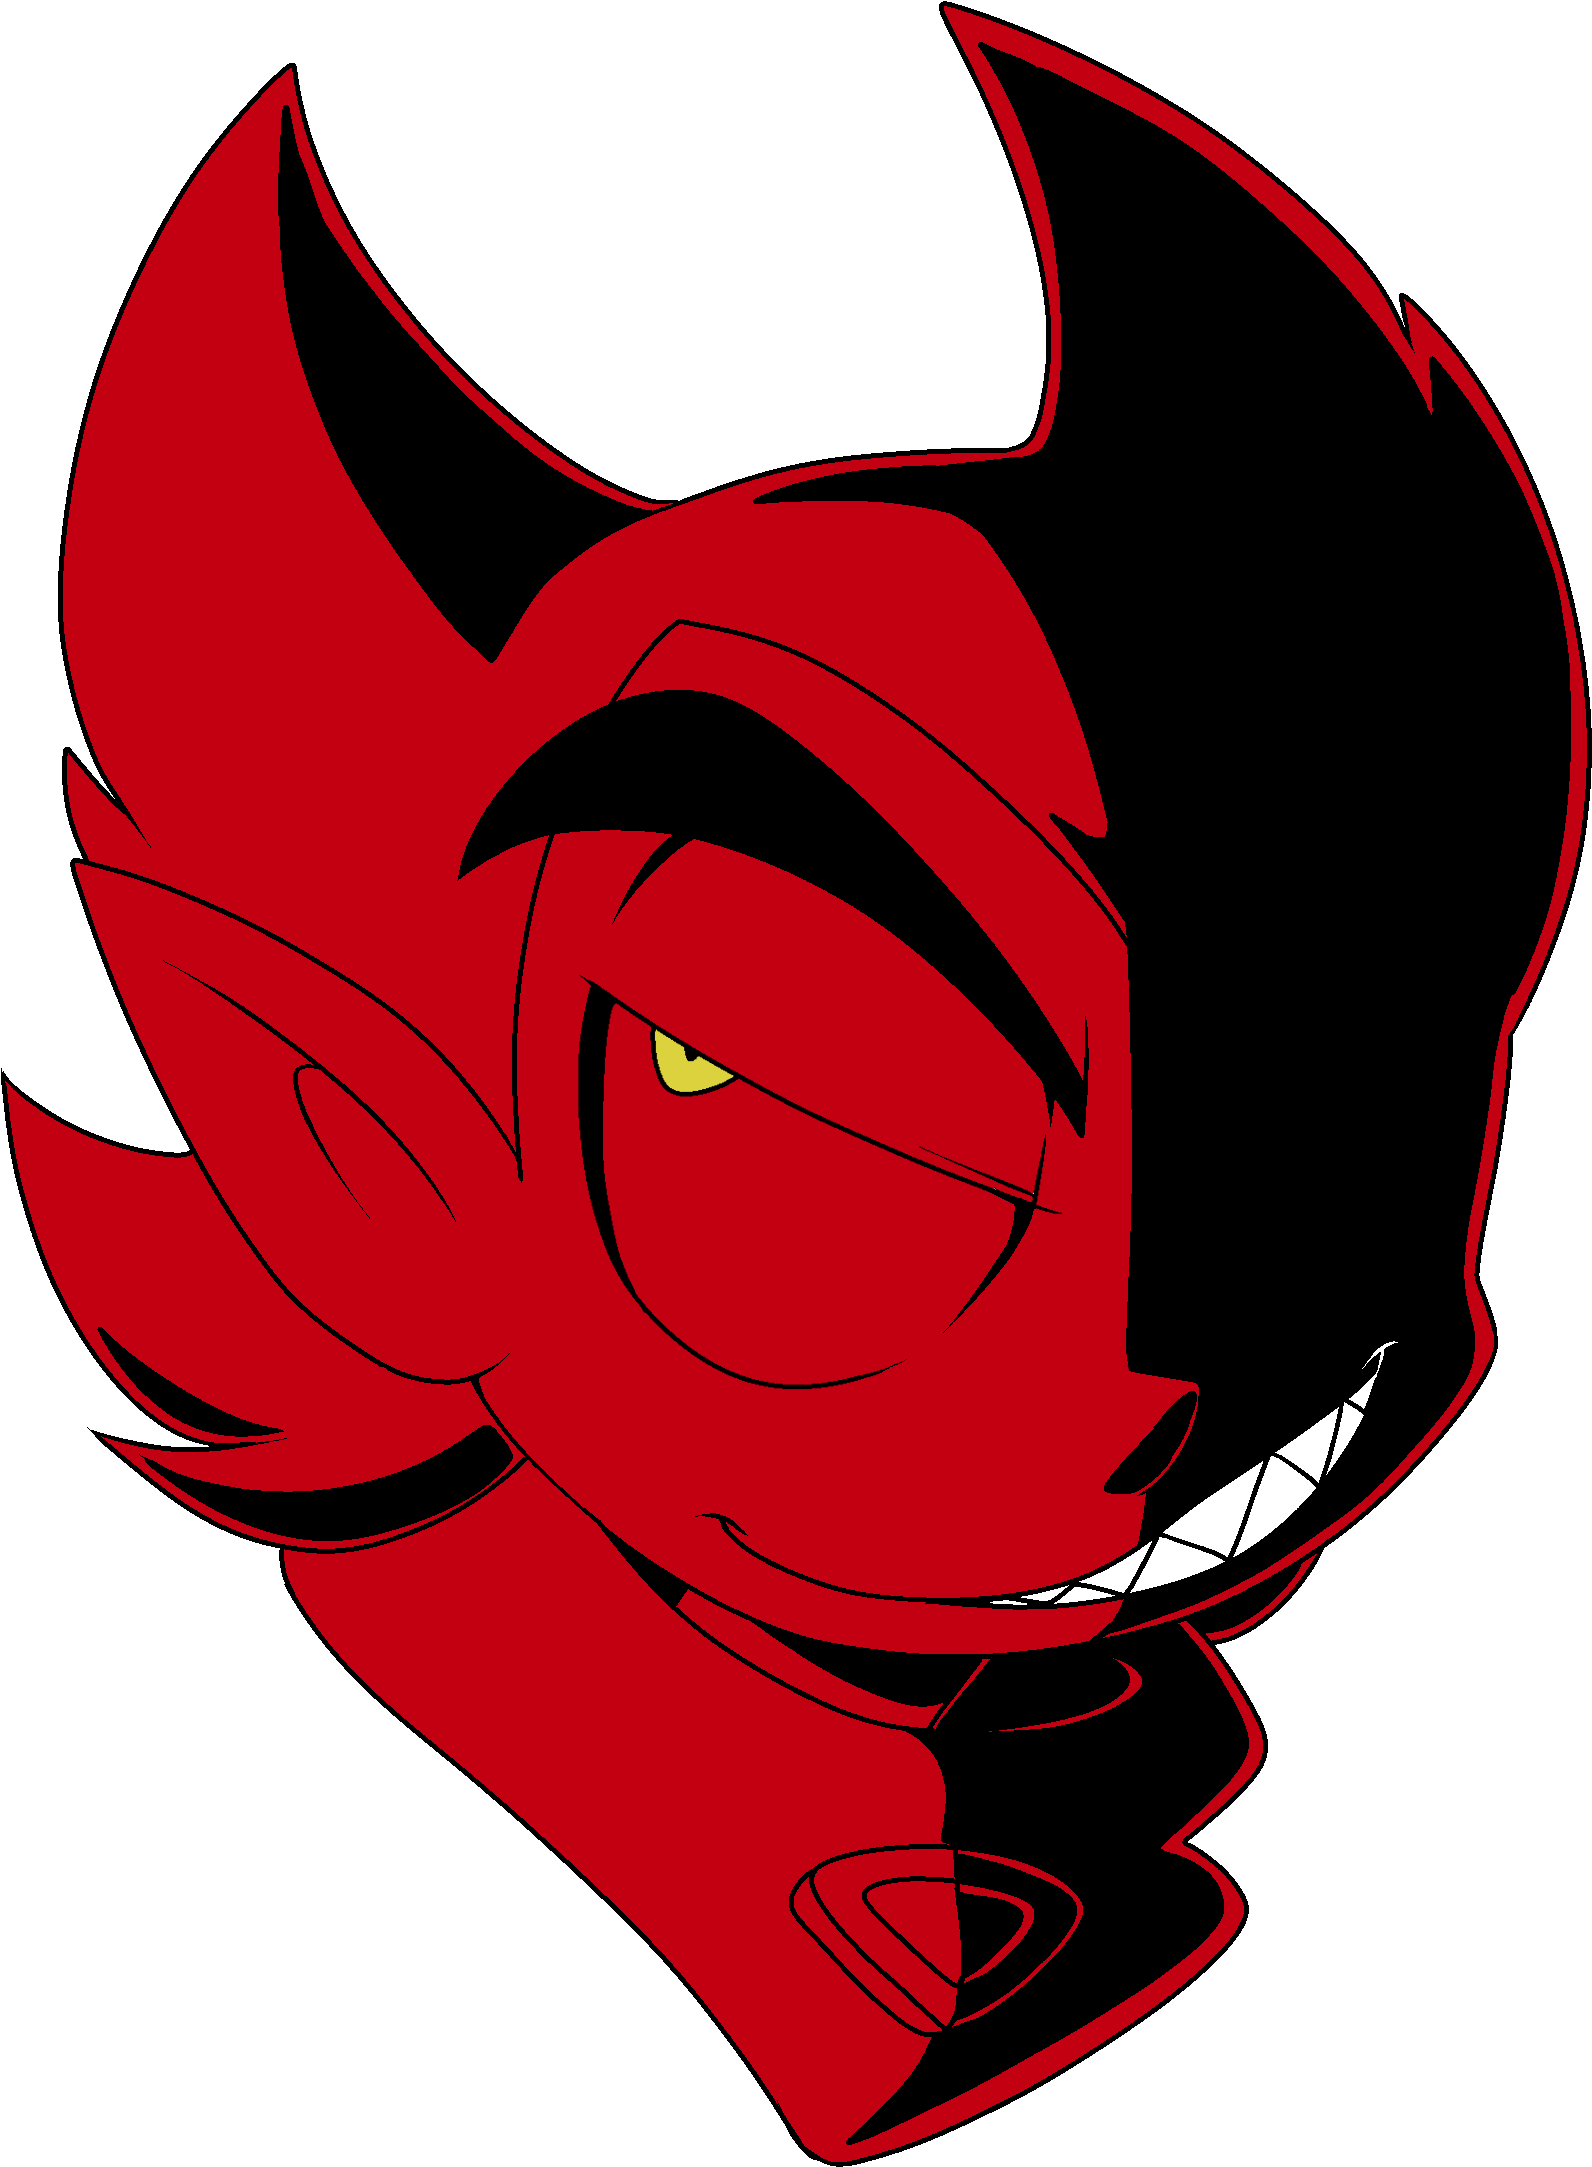 Lil Devil Horns By Toxicsoul77 Lil Devil Horns By Toxicsoul77 - Sign Of The Horns (1735x2275)